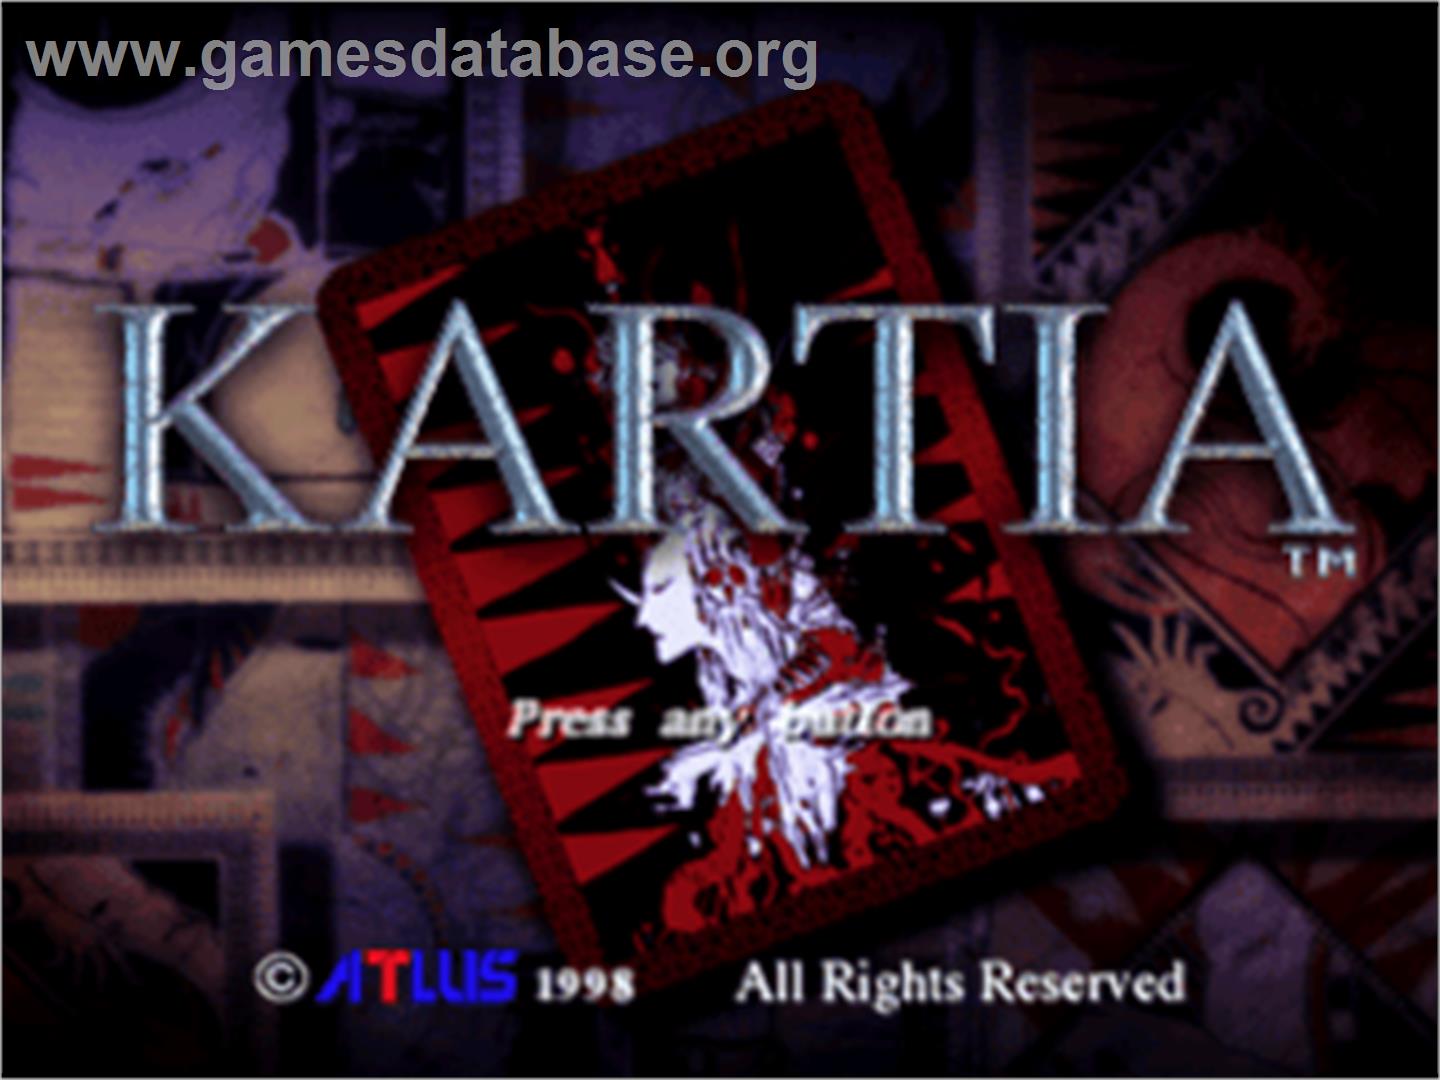 Kartia: The Word of Fate - Sony Playstation - Artwork - Title Screen